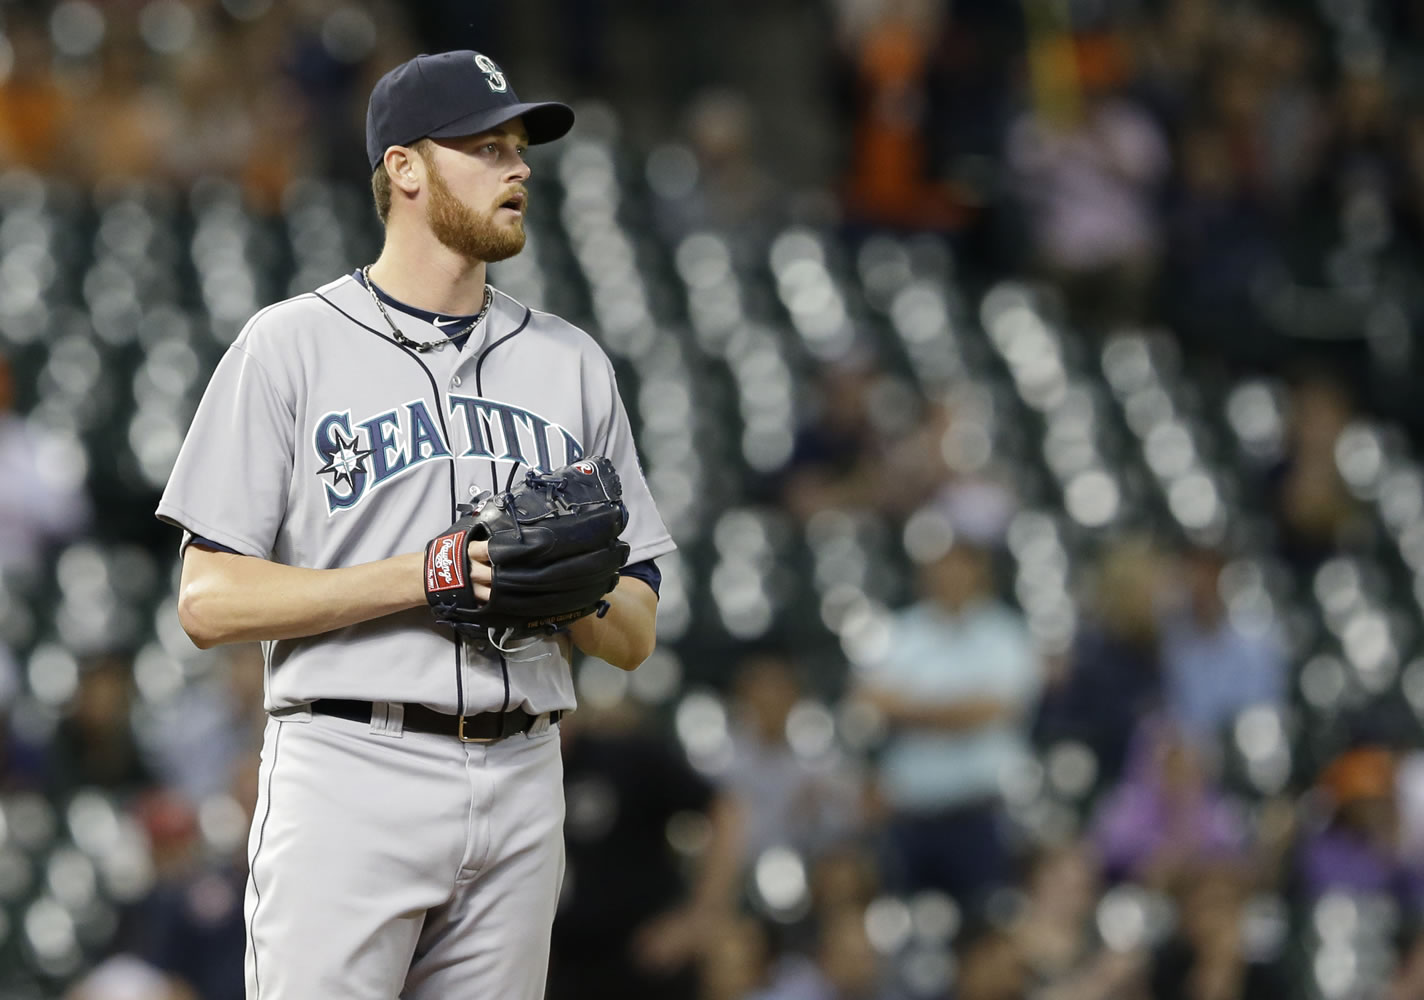 Seattle Mariners relief pitcher Charlie Furbush looks off to the outfield after loading the bases against the Houston Astros in the 11th inning Friday. The Astros won 5-4.